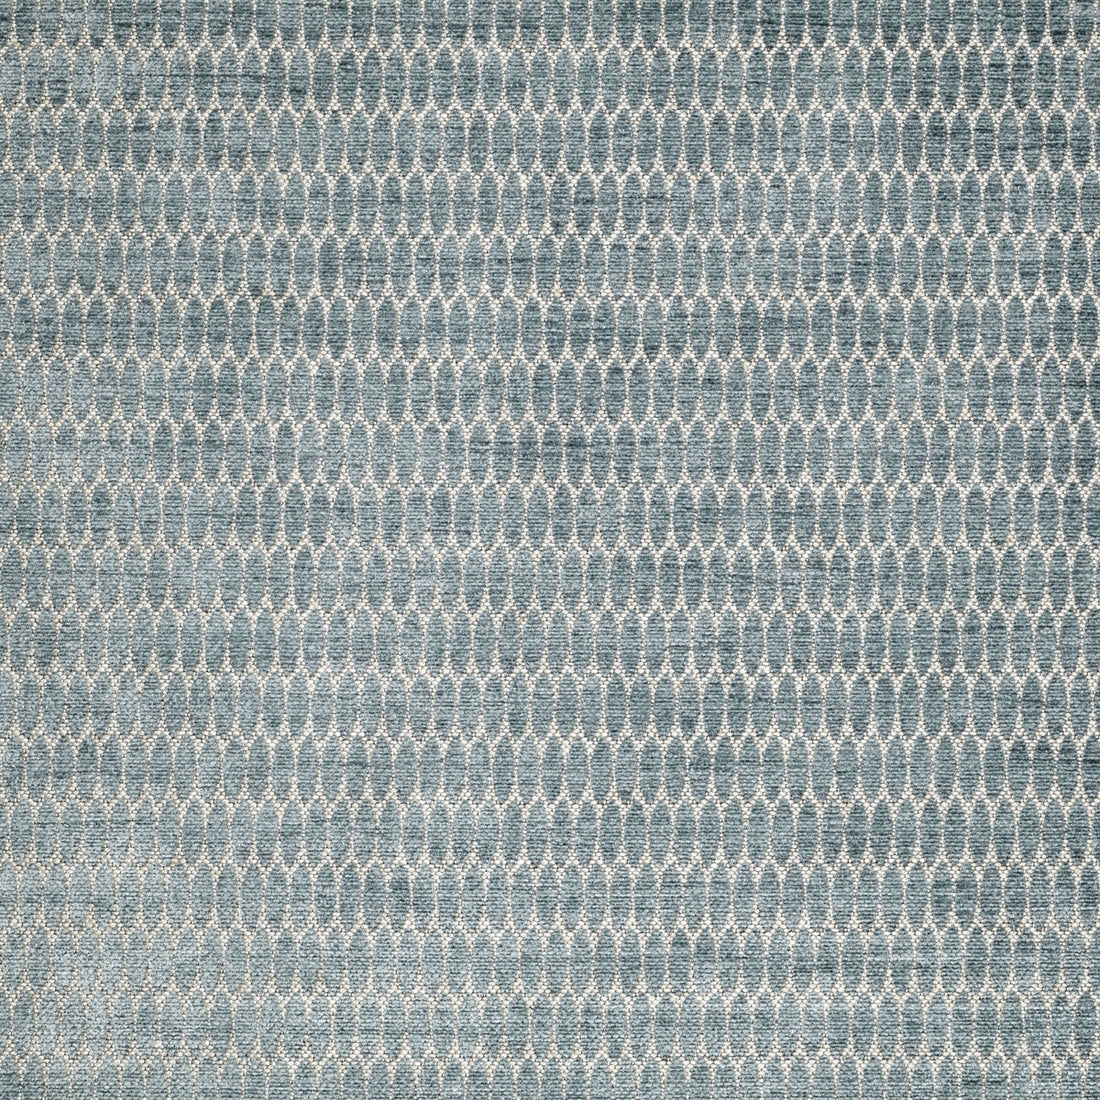 Compton fabric in pale blue color - pattern BFC-3658.1315.0 - by Lee Jofa in the Blithfield collection